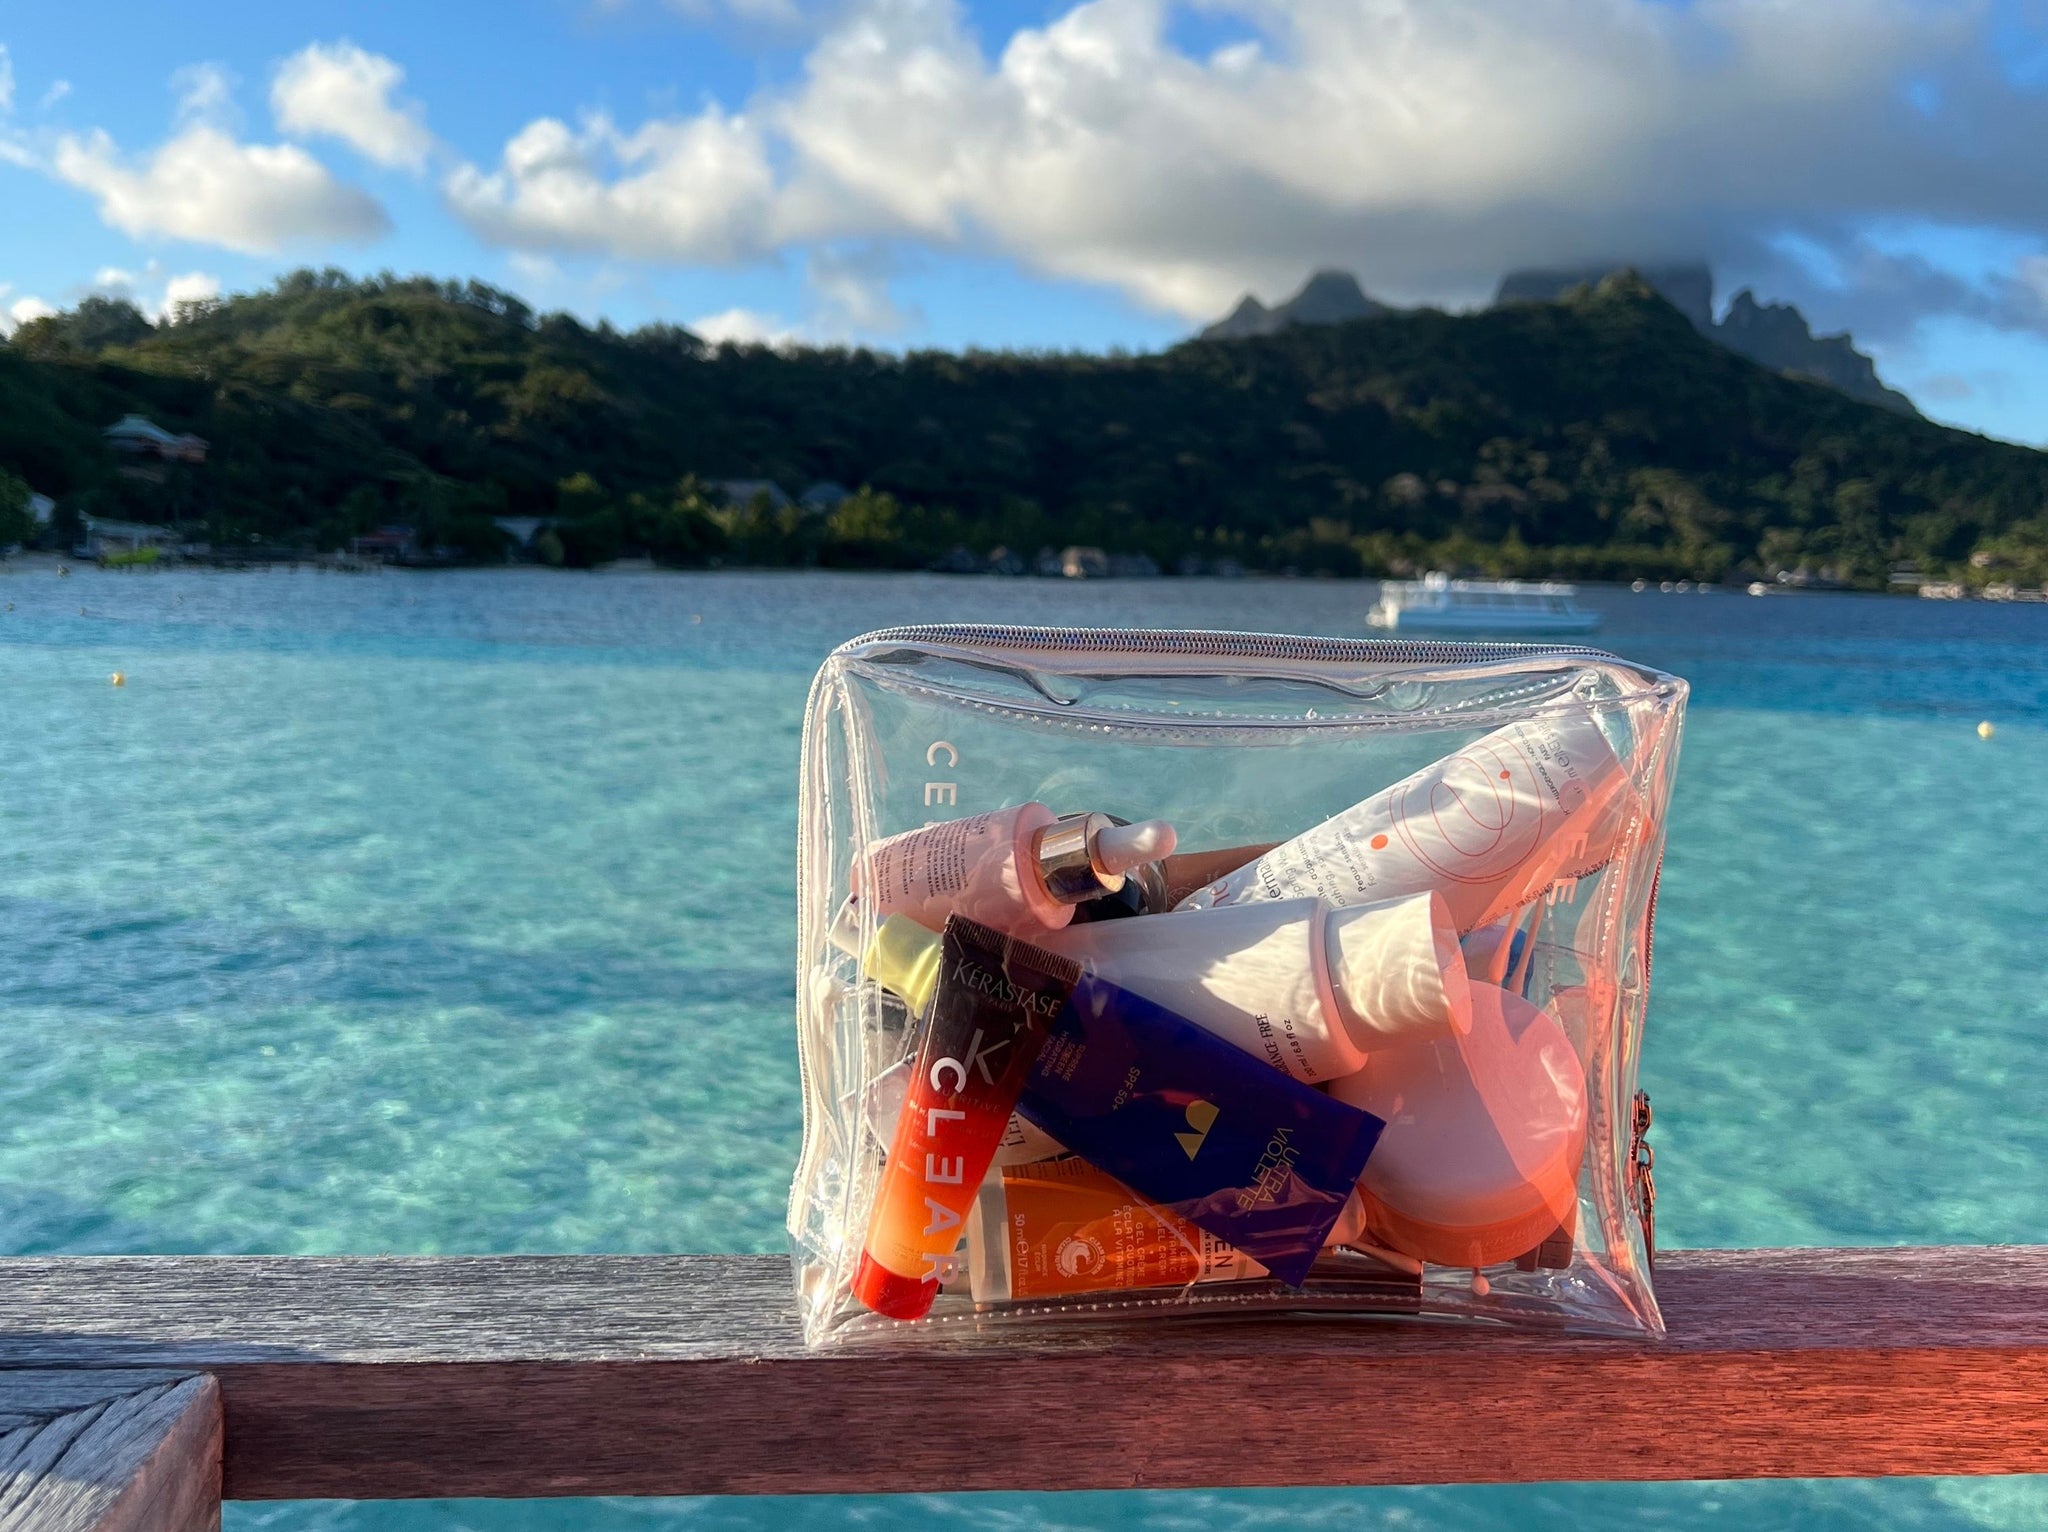 AS CEEN ON: AN OFF-GRID TROPICAL VACATION IN BORA BORA